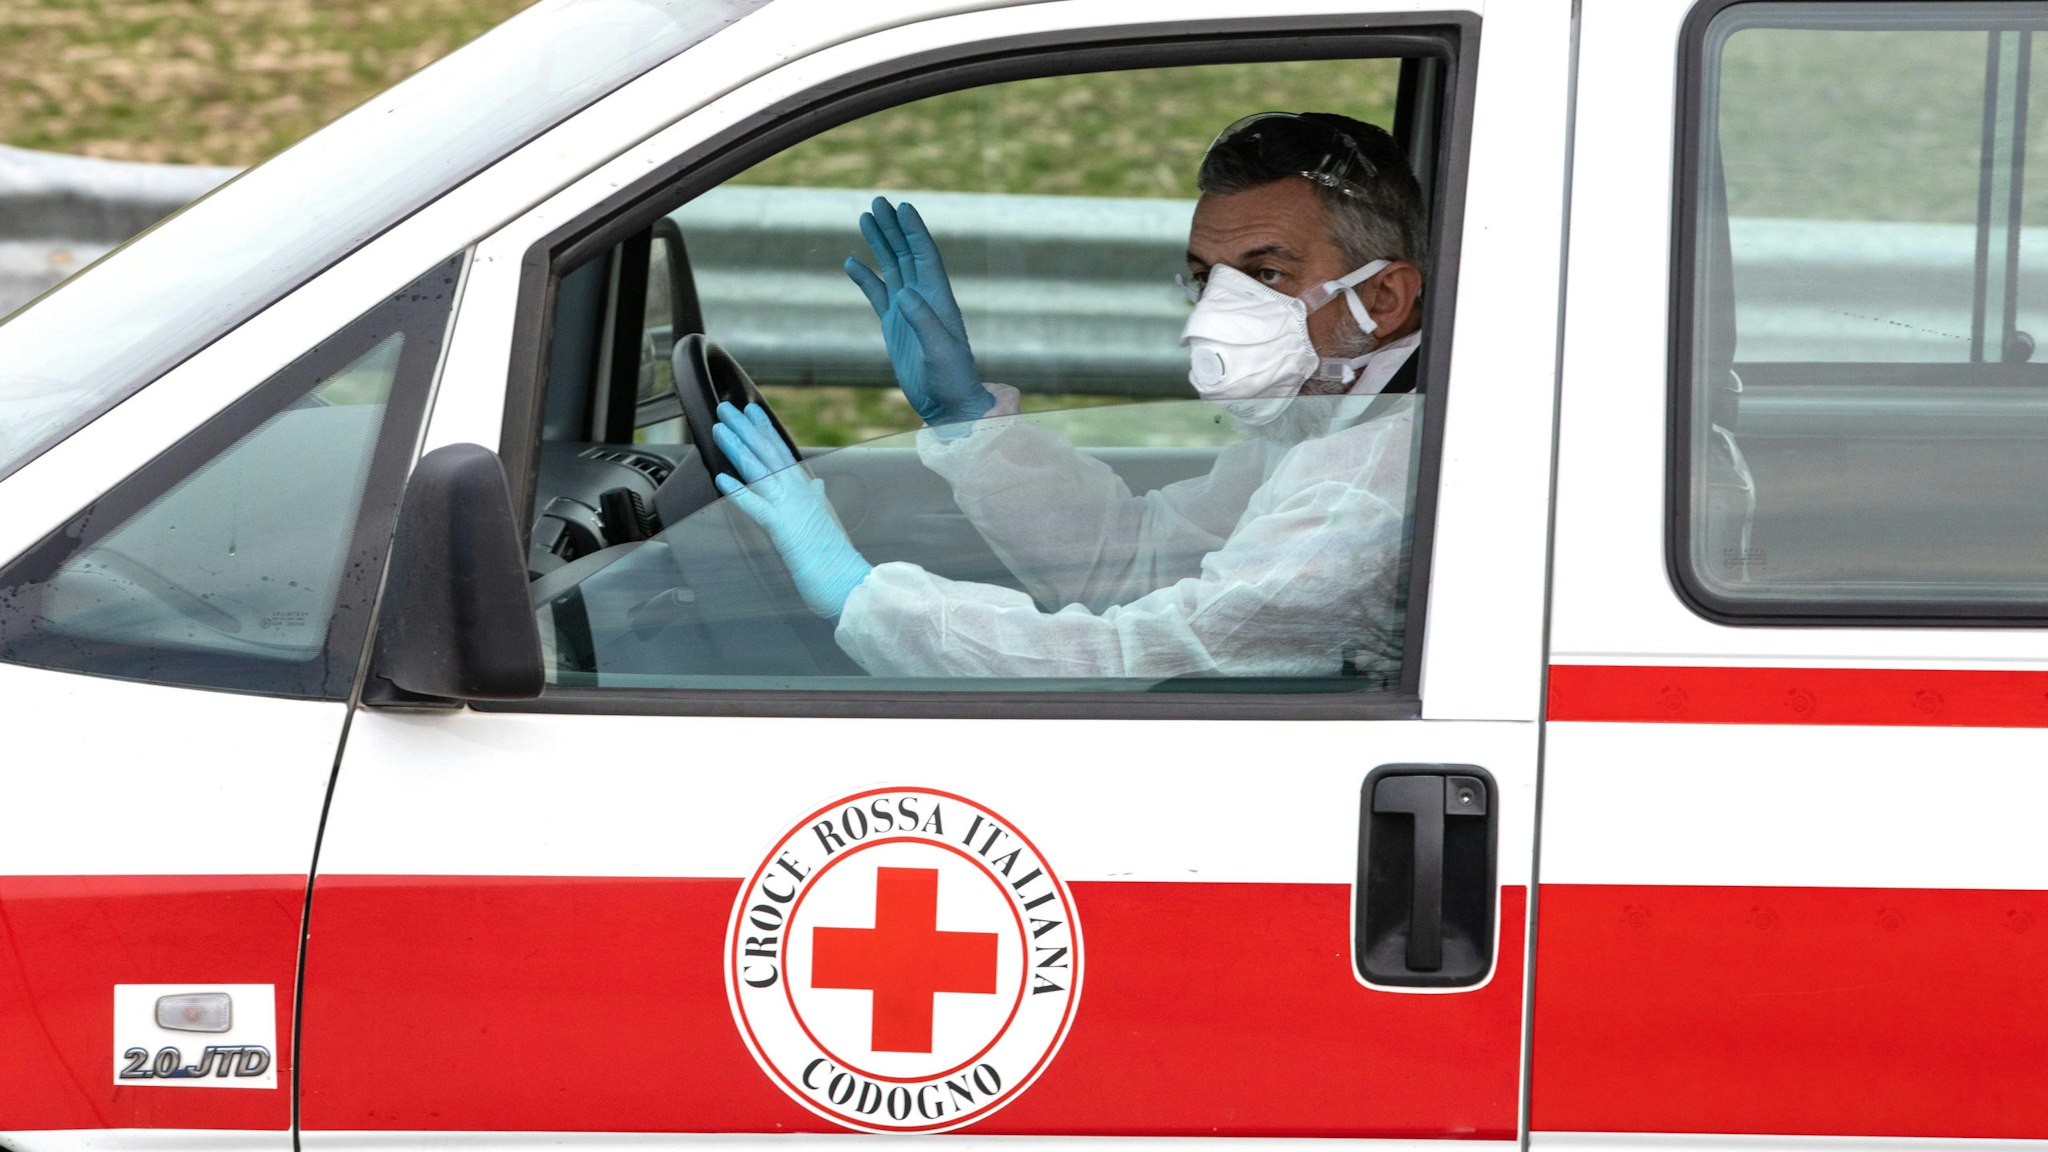 CASALPUSTERLENGO, ITALY - FEBRUARY 23: A member of the Italian Red Cross, wearing a respiratory mask, drives a vehicle on February 23, 2020 in Casalpusterlengo, south-west Milan, Italy. Casalpusterlengo is one of the ten small towns placed under lockdown earlier this morning as a second death from coronavirus sparked fears throughout the Lombardy region.